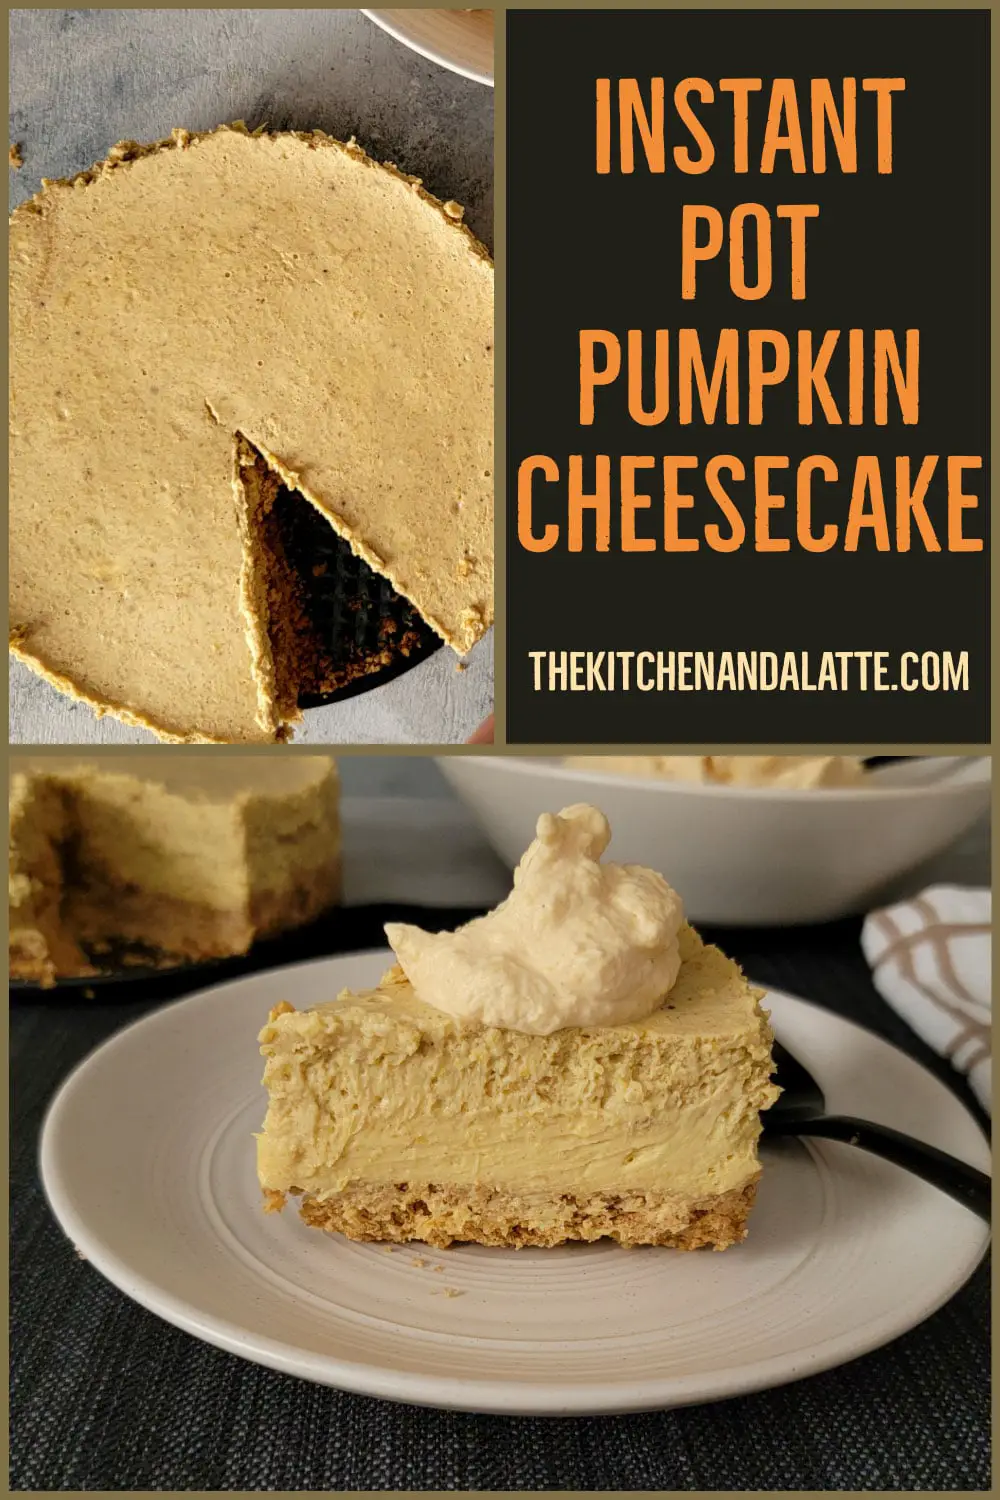 Pinterest image - Instant Pot pumpkin cheesecake on a plate with whipped cream and an image of the whole cake missing a piece.